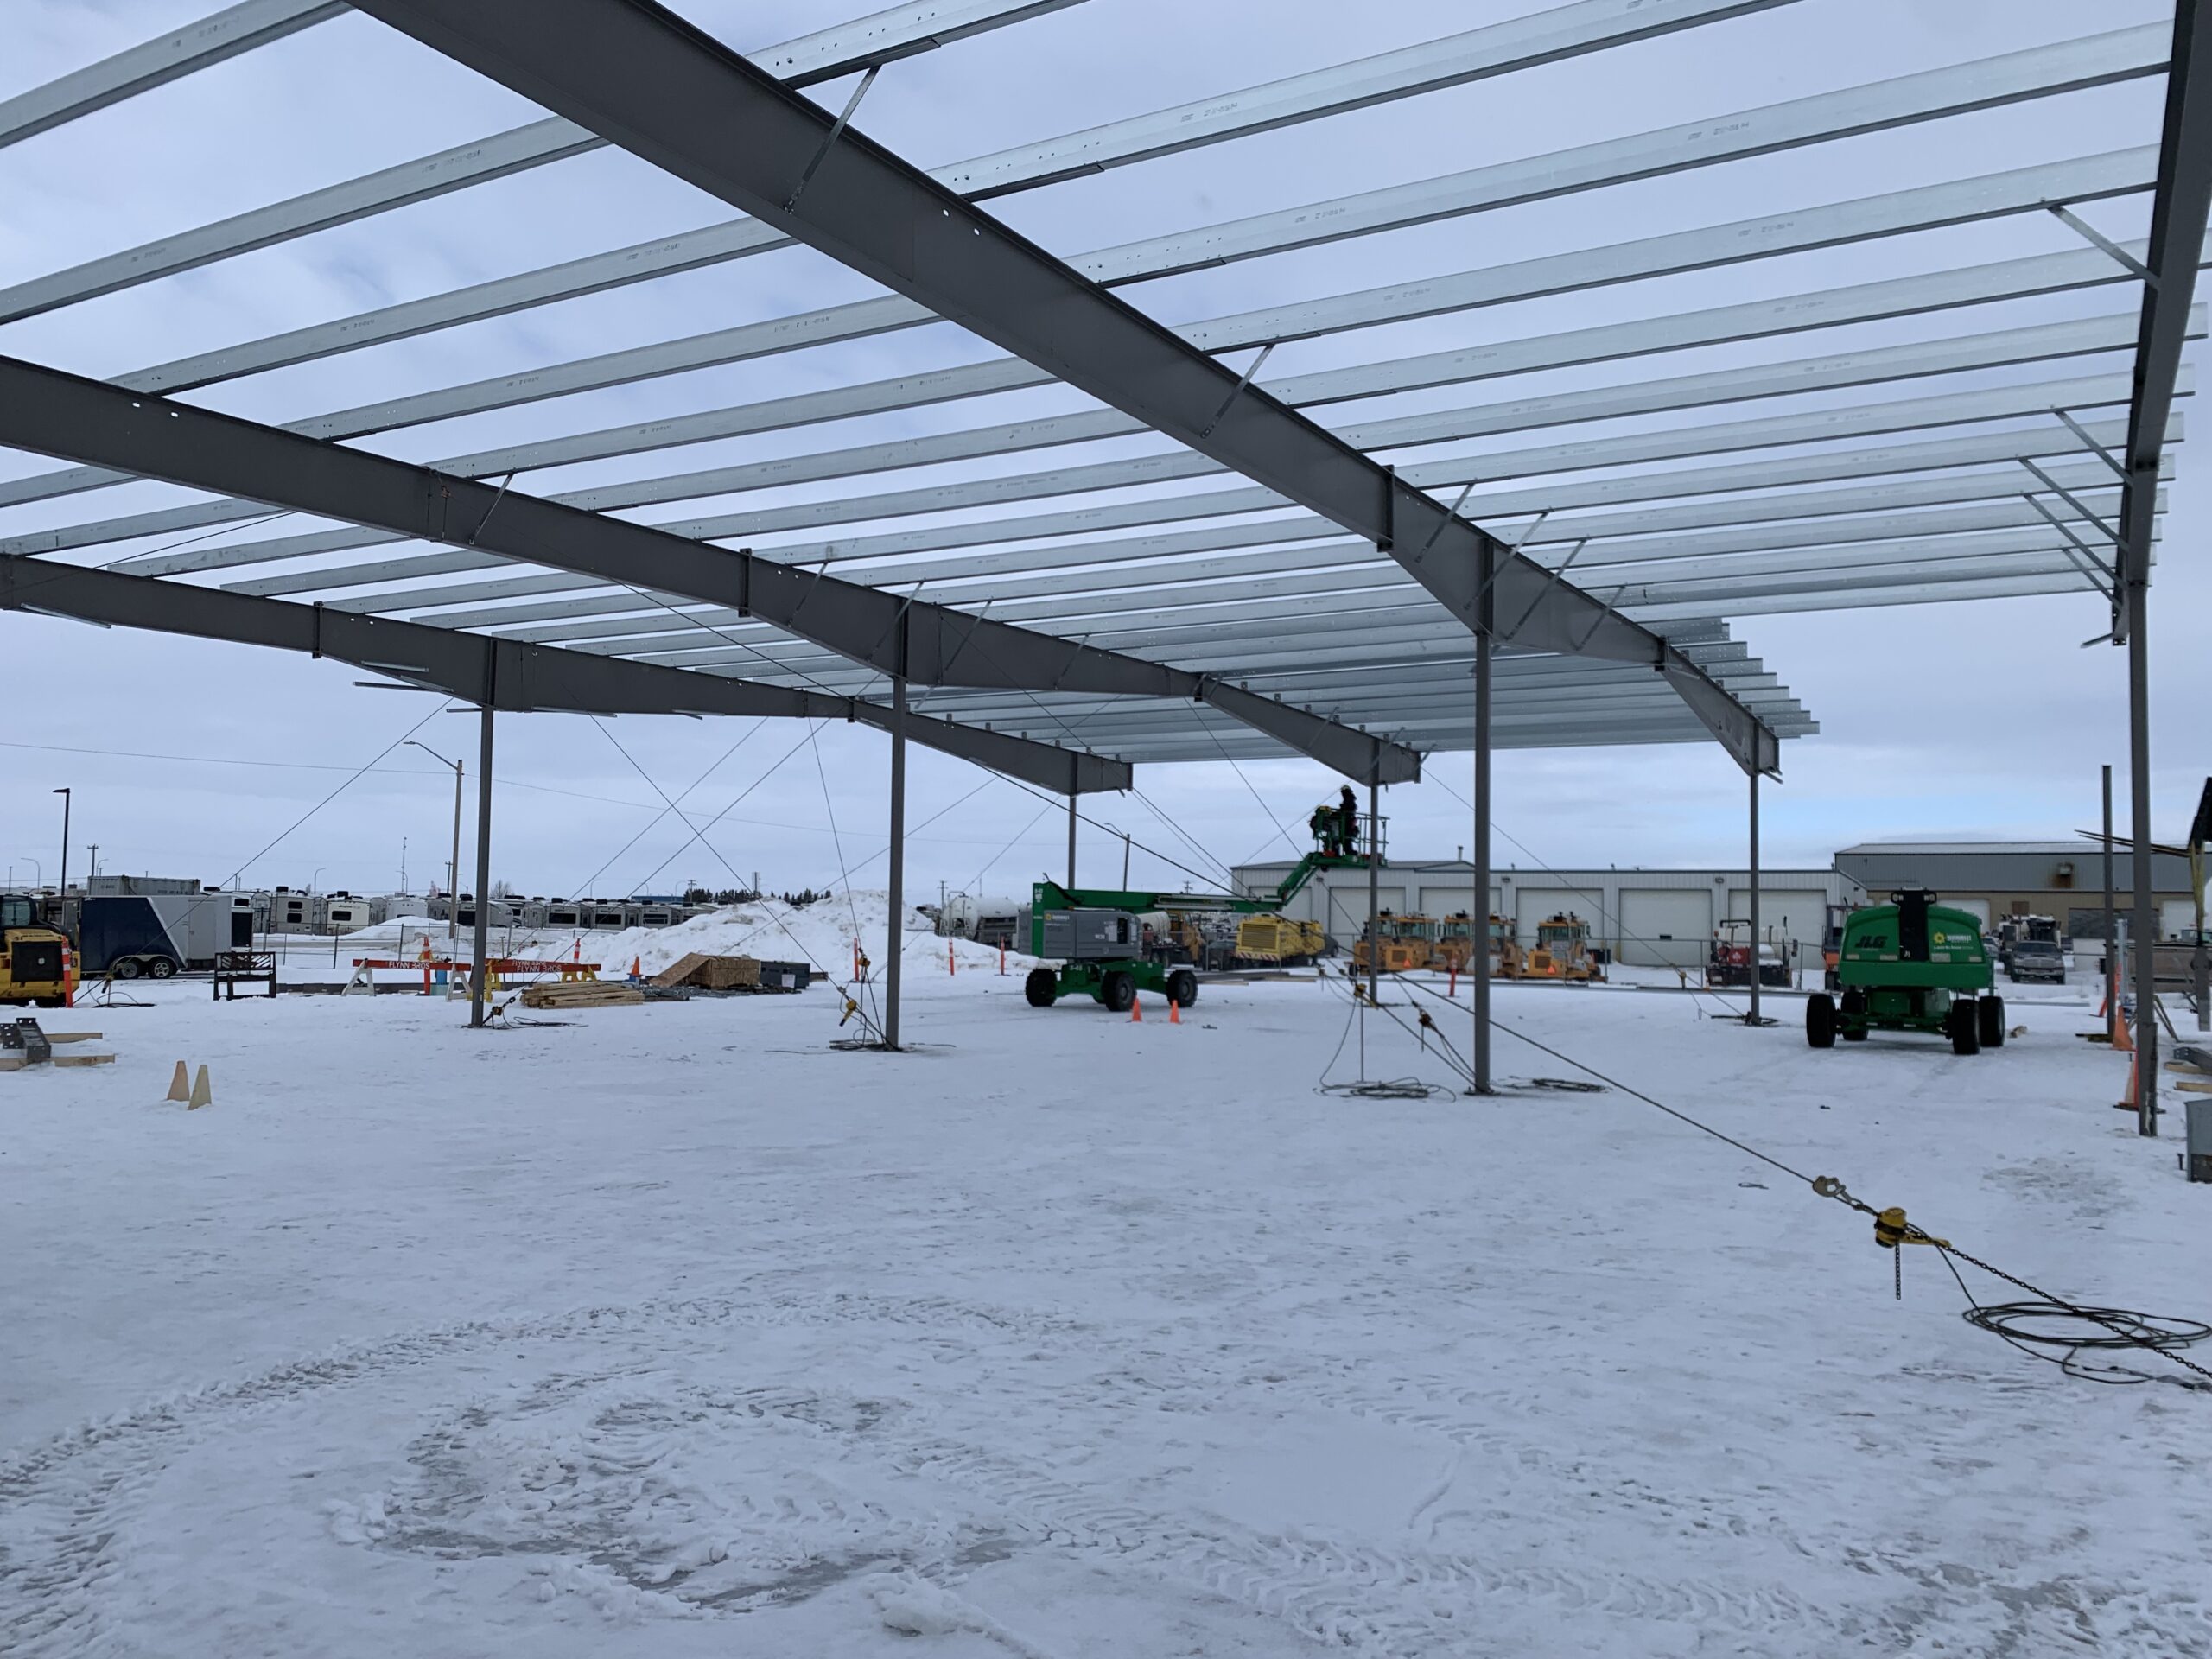 The skeletal structure of a steel building mid-construction. Snow covers the ground.